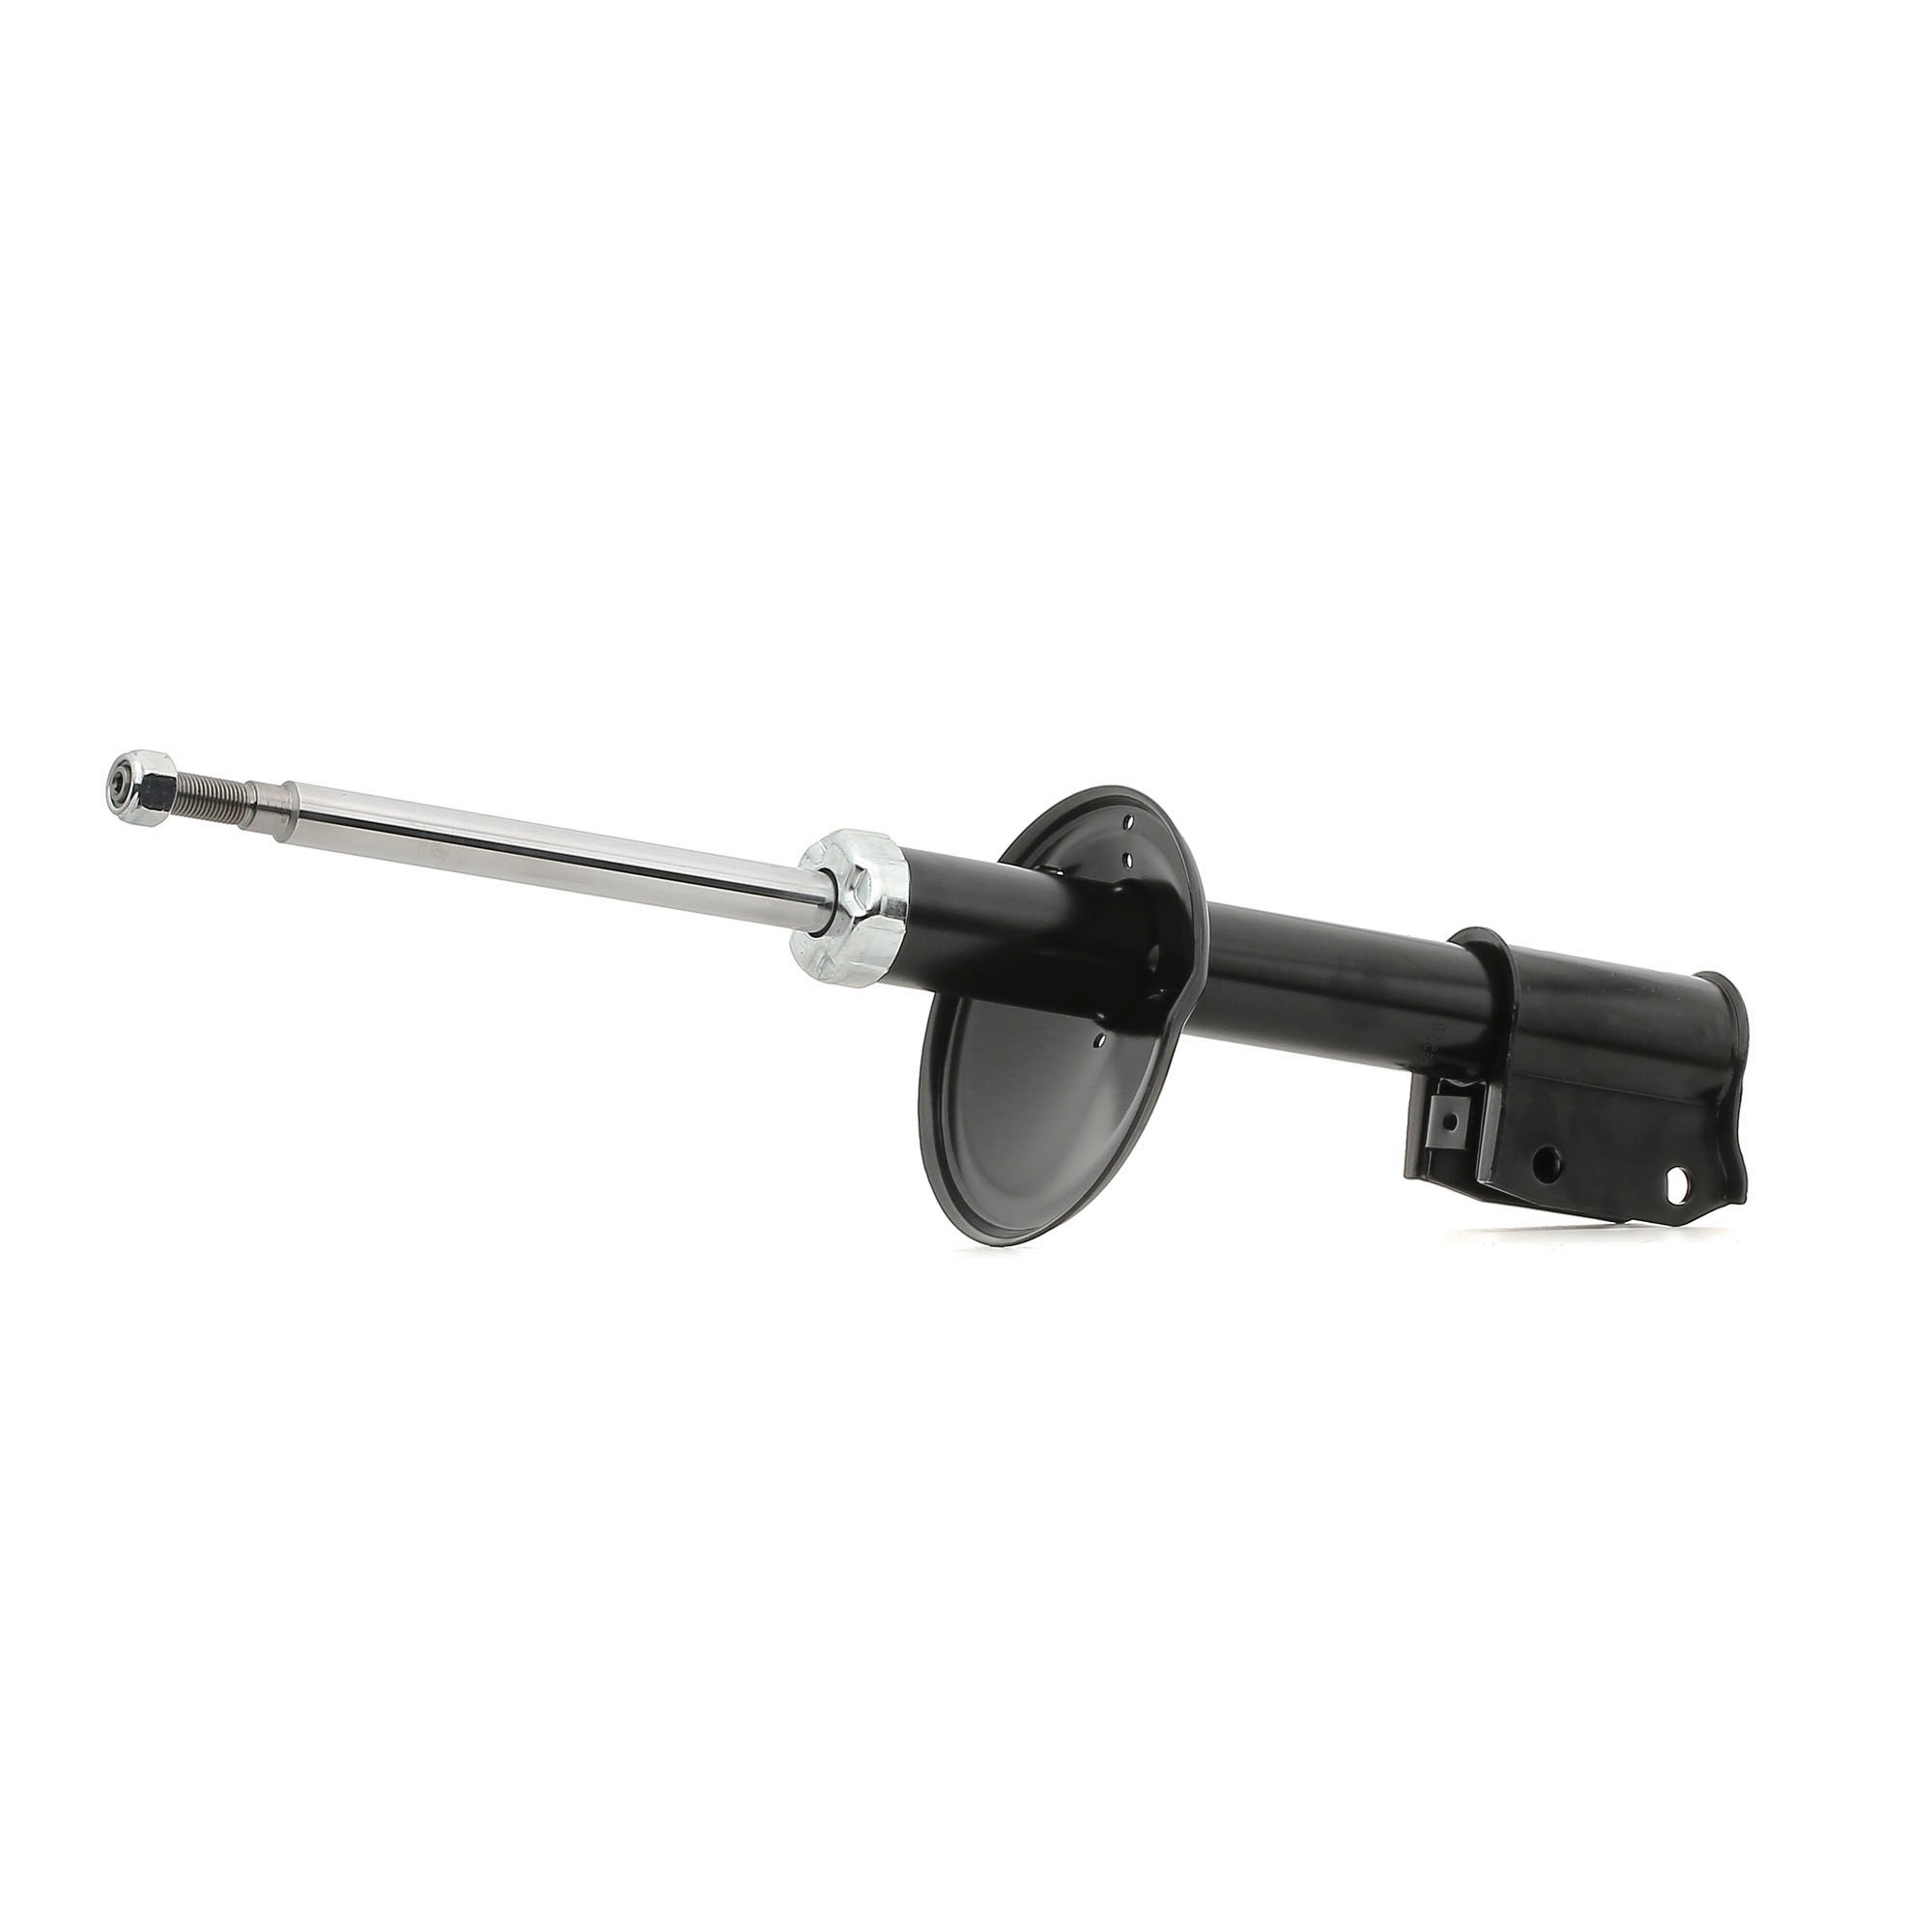 STARK SKSA-0131002 Shock absorber Front Axle, Gas Pressure, 531x358 mm, Twin-Tube, Suspension Strut, Top pin, Bottom Clamp